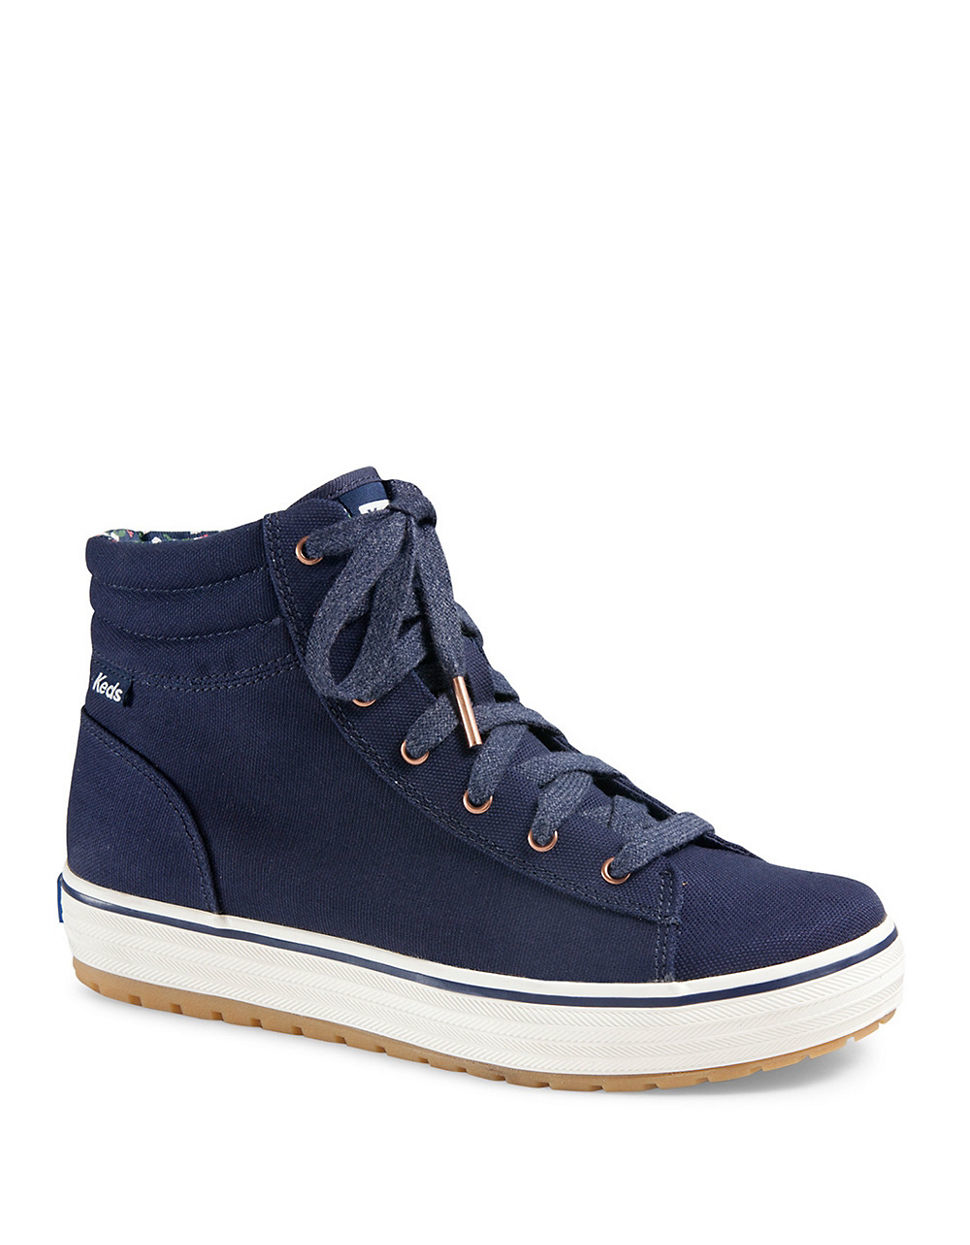 Keds Hi Rise Canvas High-top Sneakers in Blue | Lyst